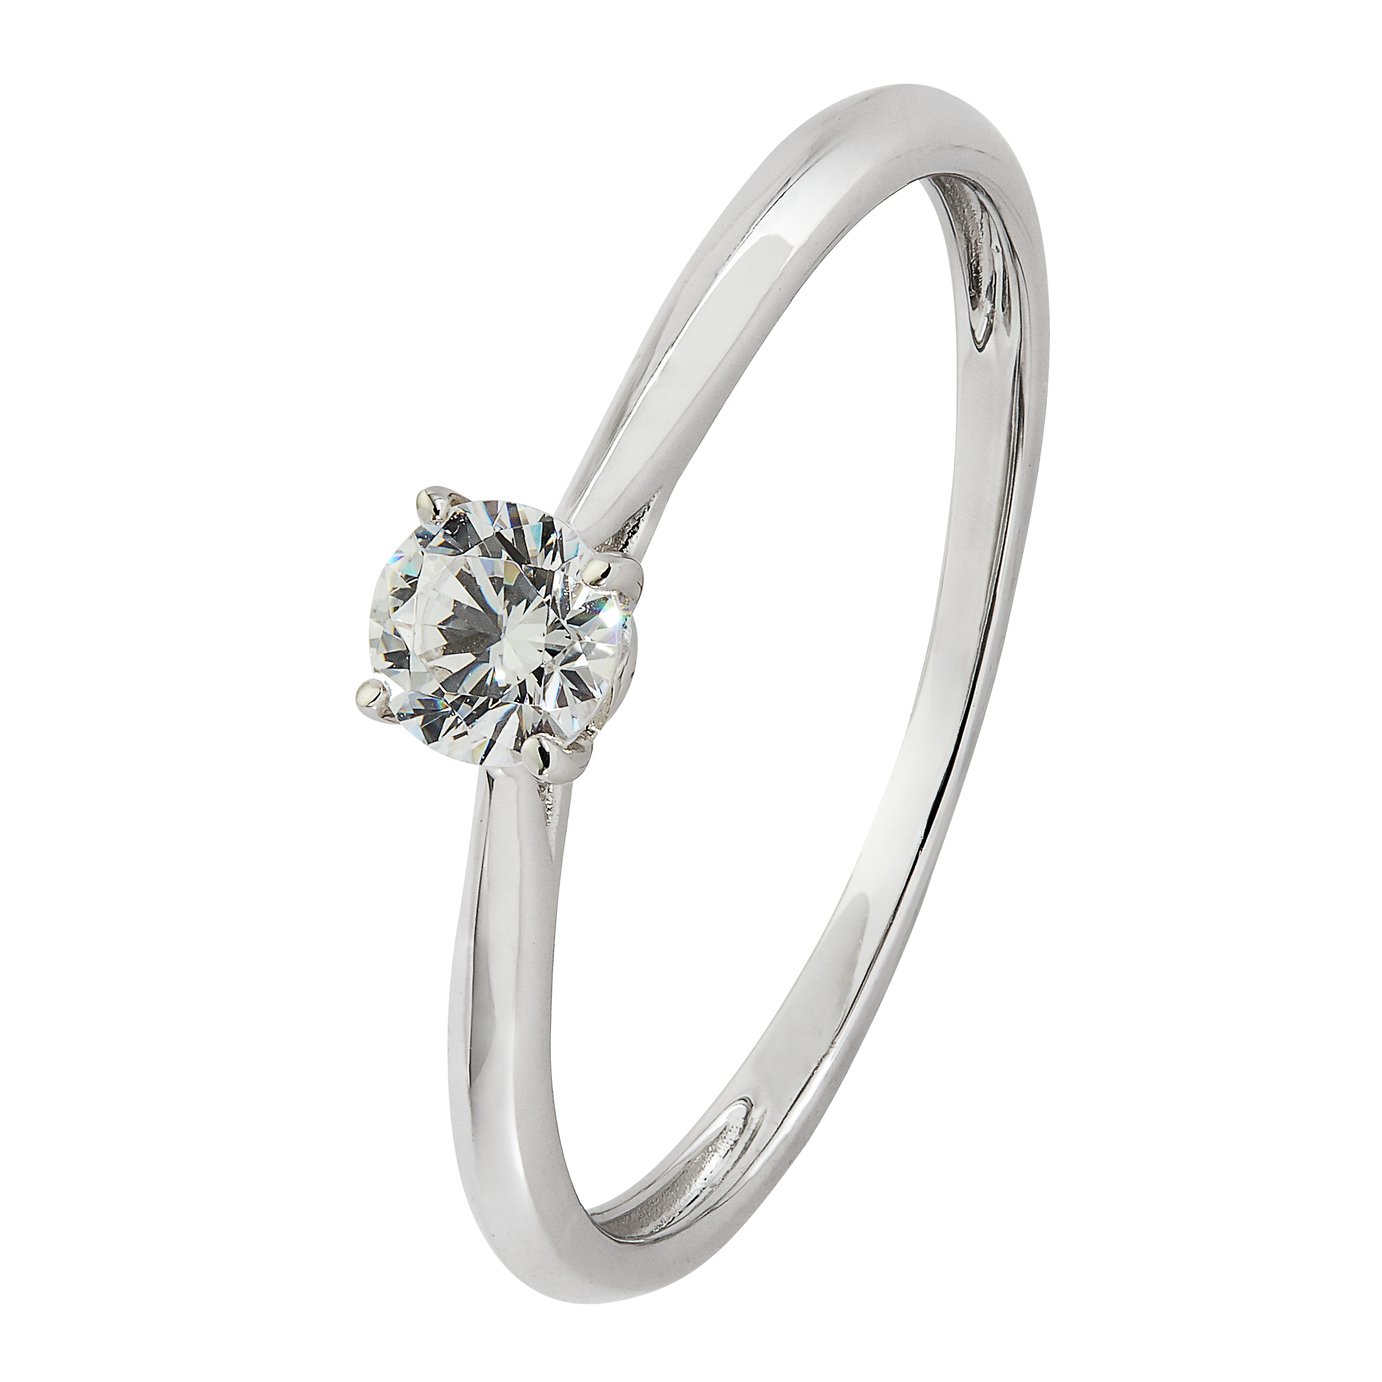 Revere 9ct White Gold Cubic Zirconia Engagement Ring - J